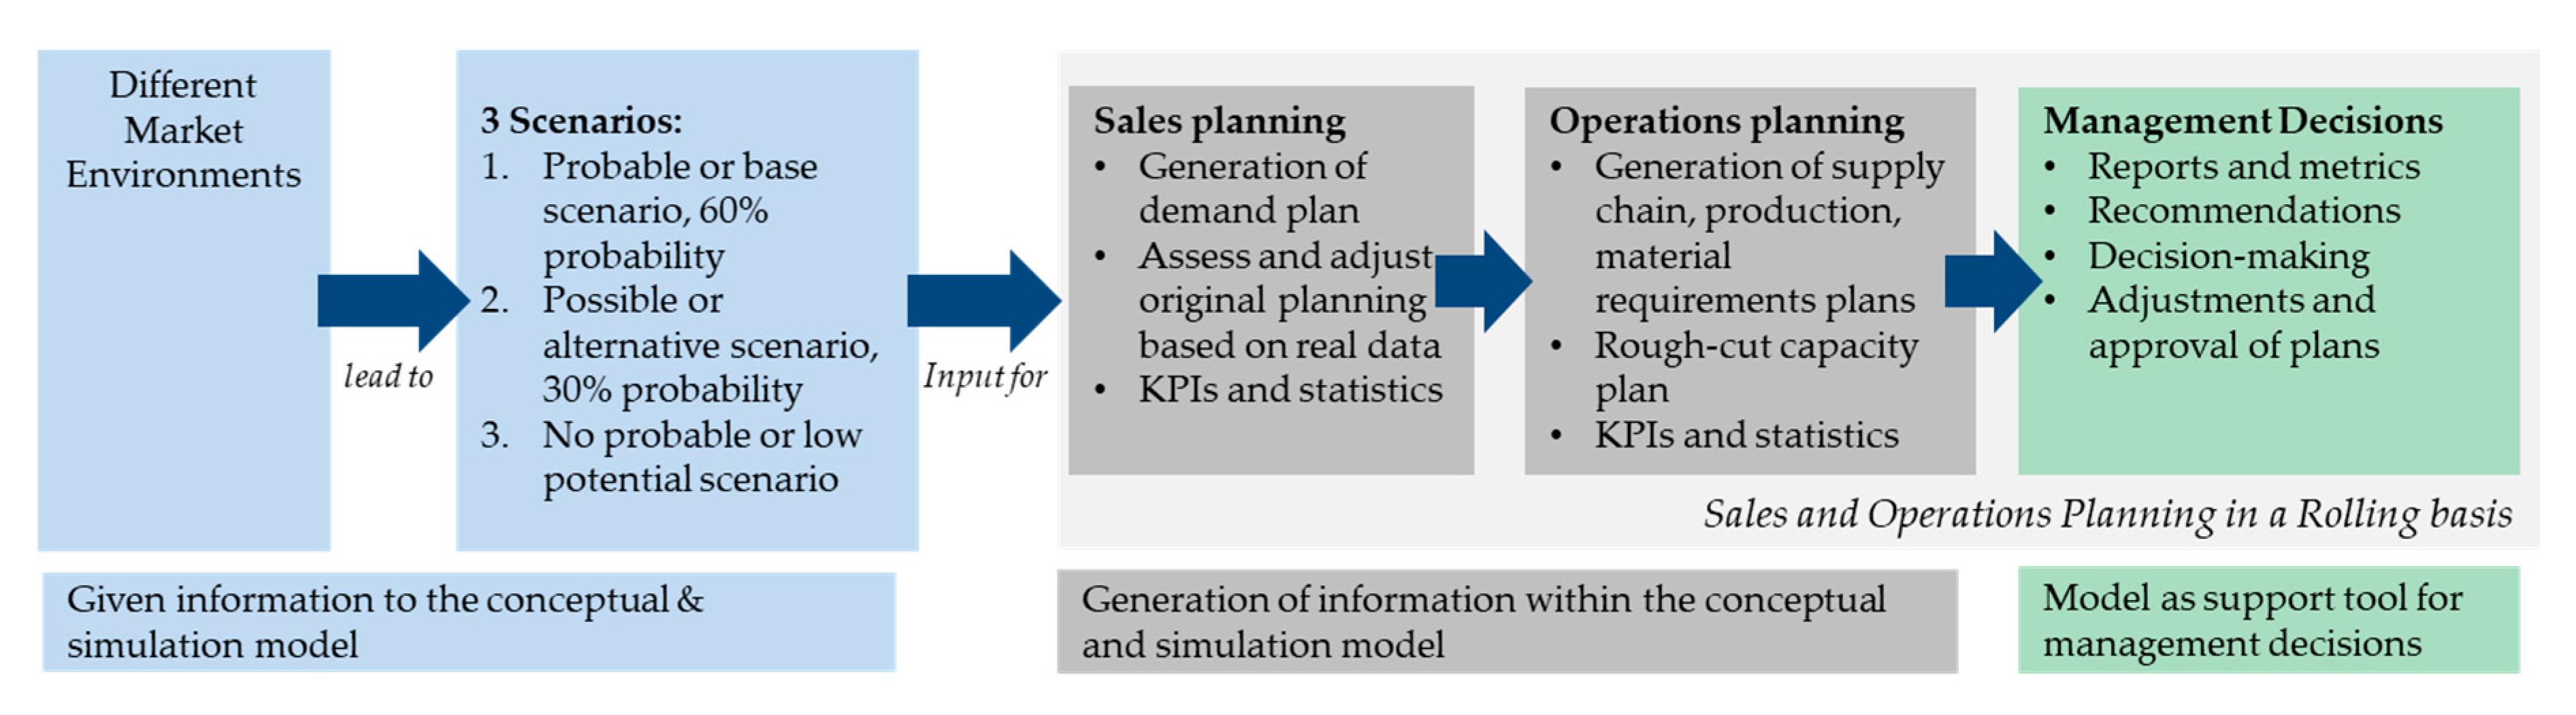 Applied Sciences Free Full Text Predictive Sales And Operations Planning Based On A Statistical Treatment Of Demand To Increase Efficiency A Supply Chain Simulation Case Study Html